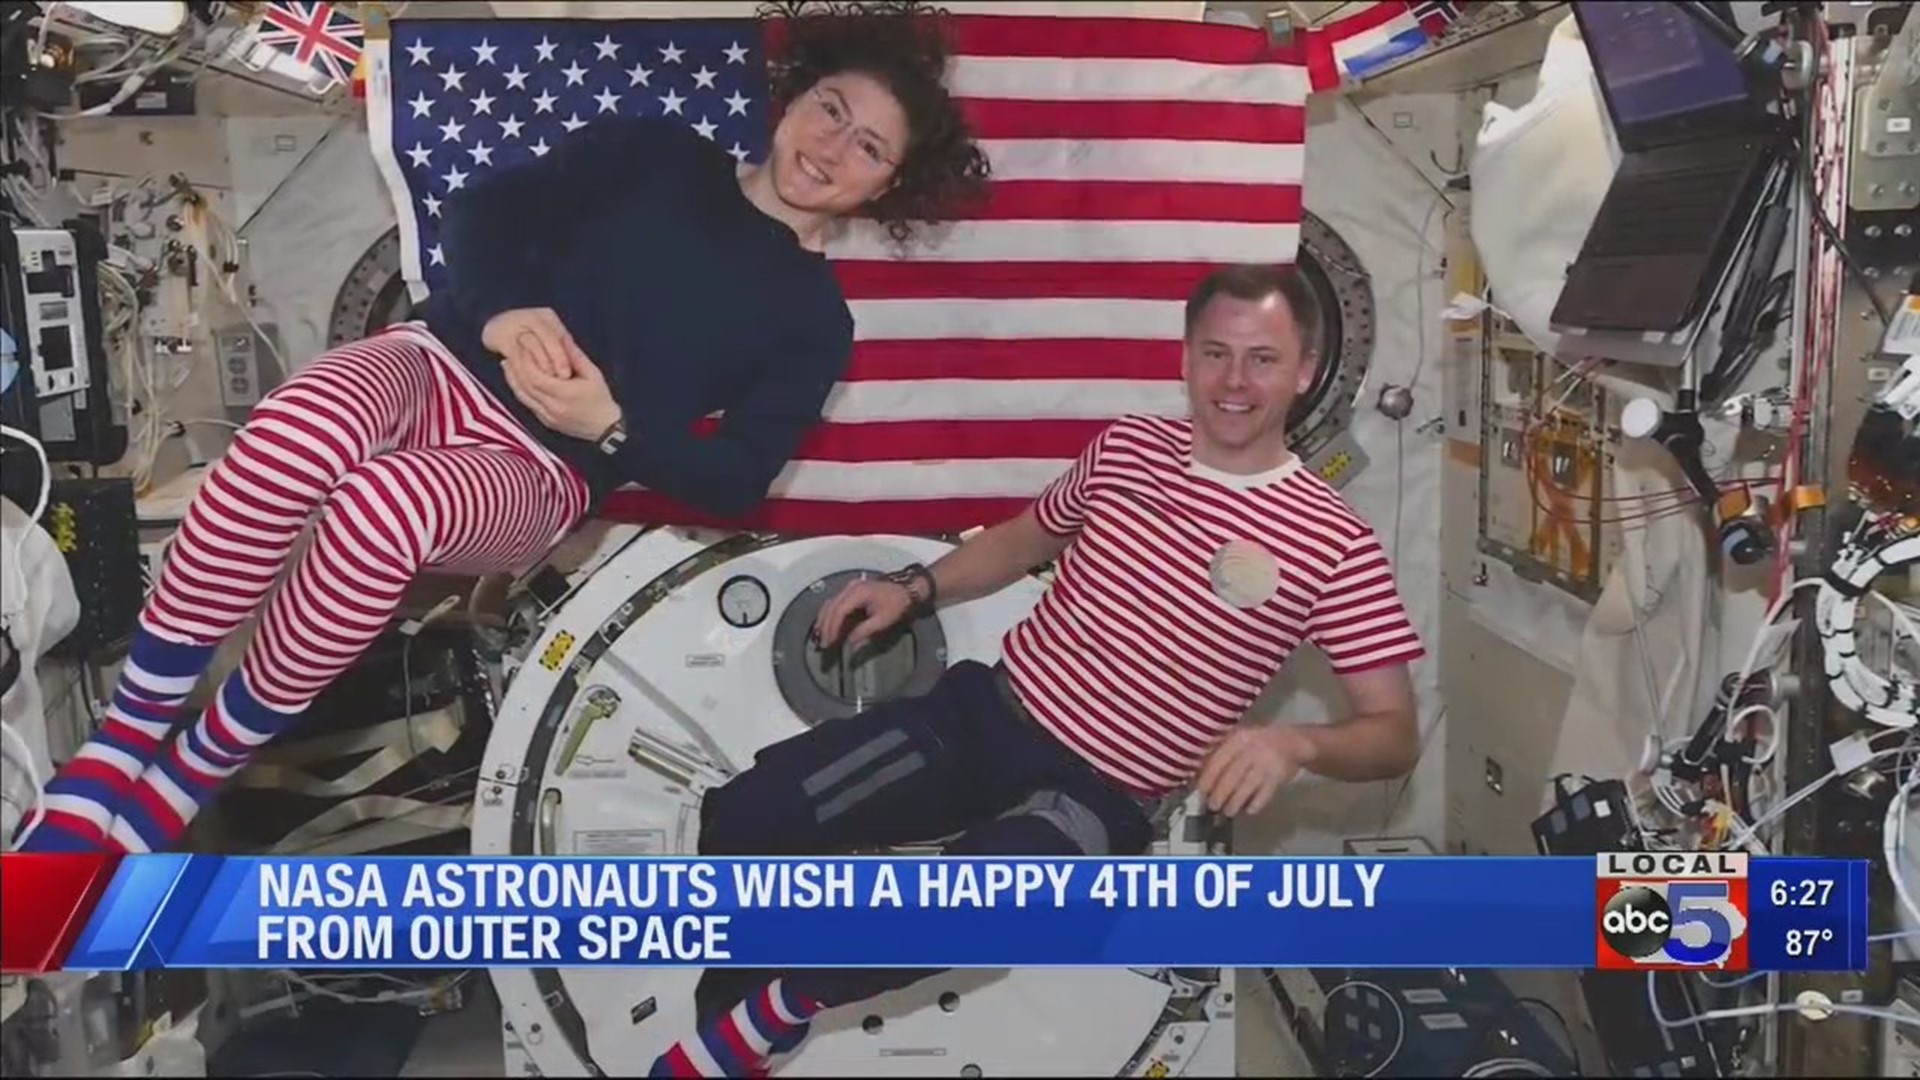 NASA astronauts tweet out happy 4th of July from space